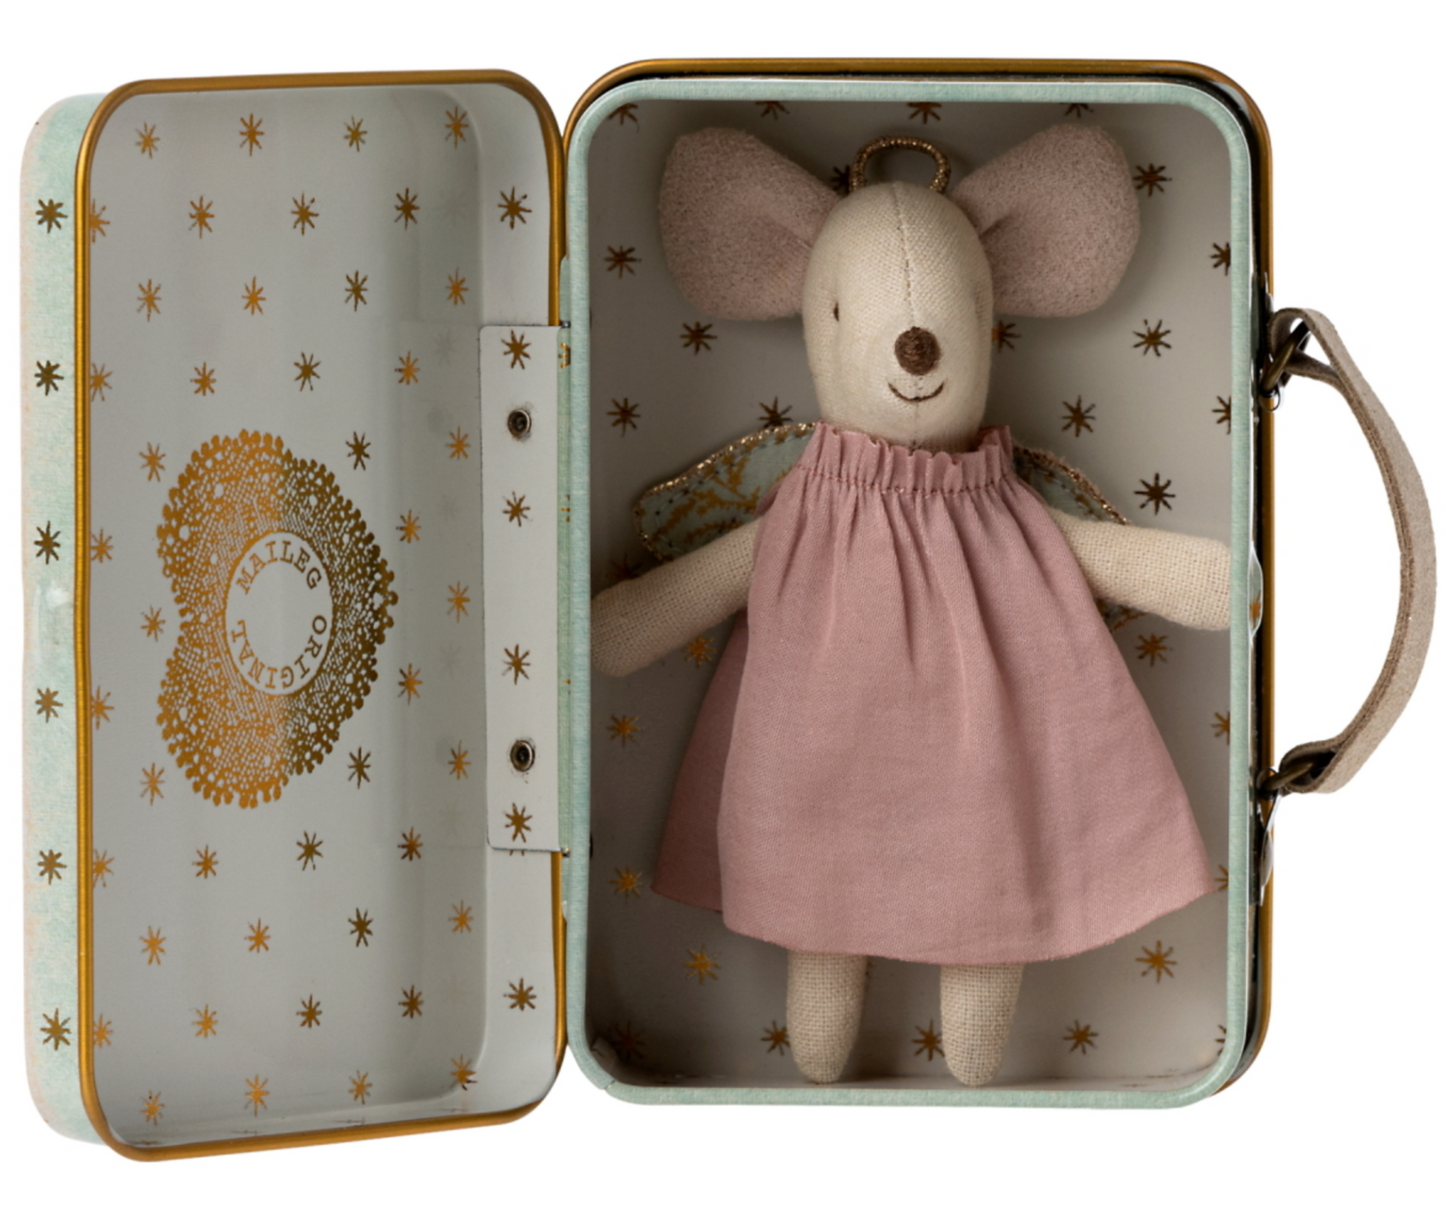 Angel Mouse in Suitcase (8043875598623)